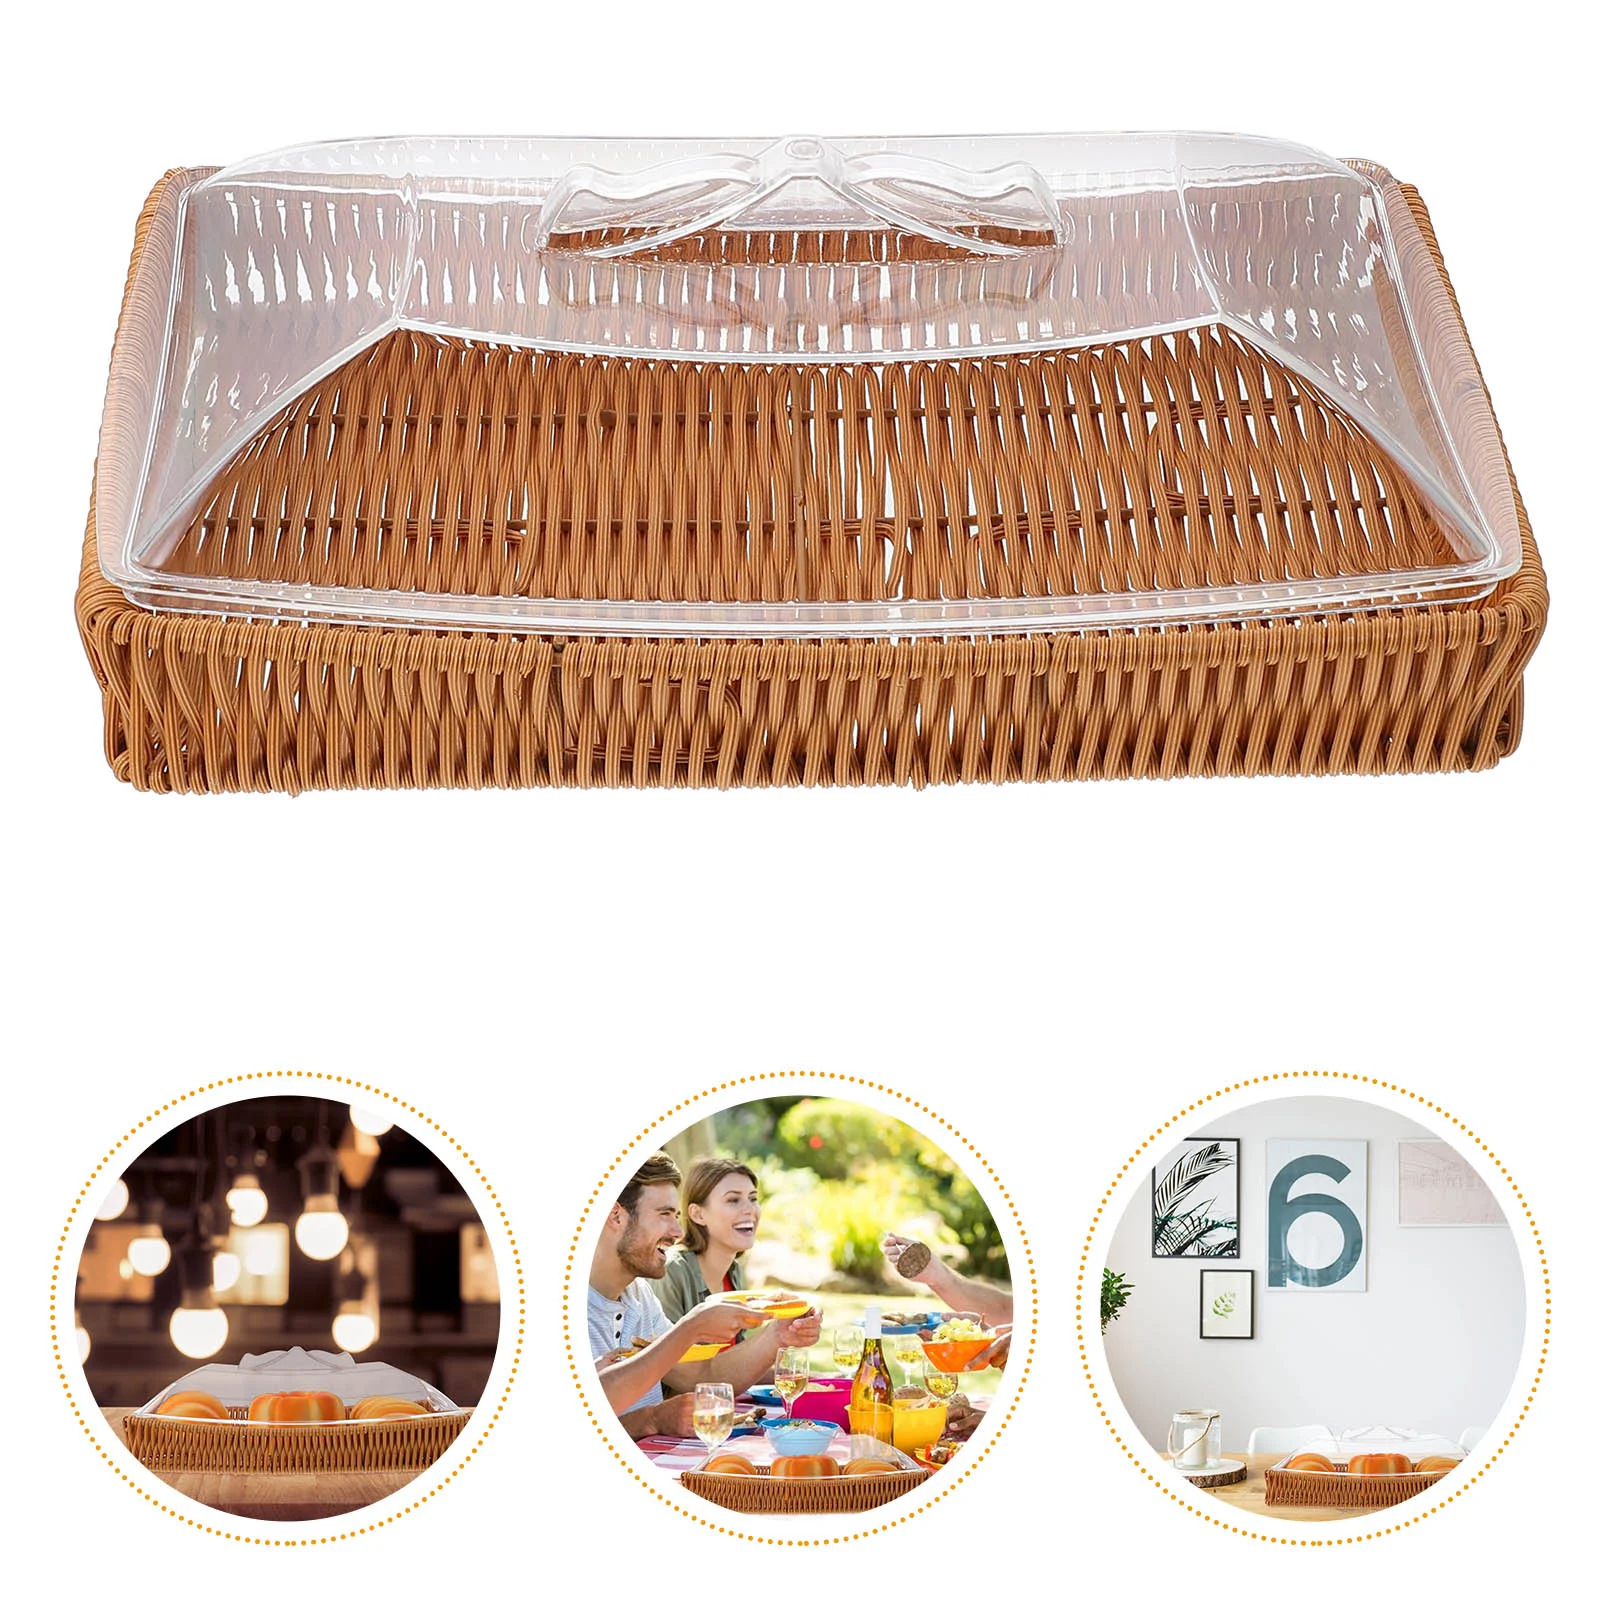 

Basket Storage Wicker Tray Serving Snack Vegetable Fruit Box Countertop Acrylic Bread Woven Cover Handmade Candy Arranger Snacks